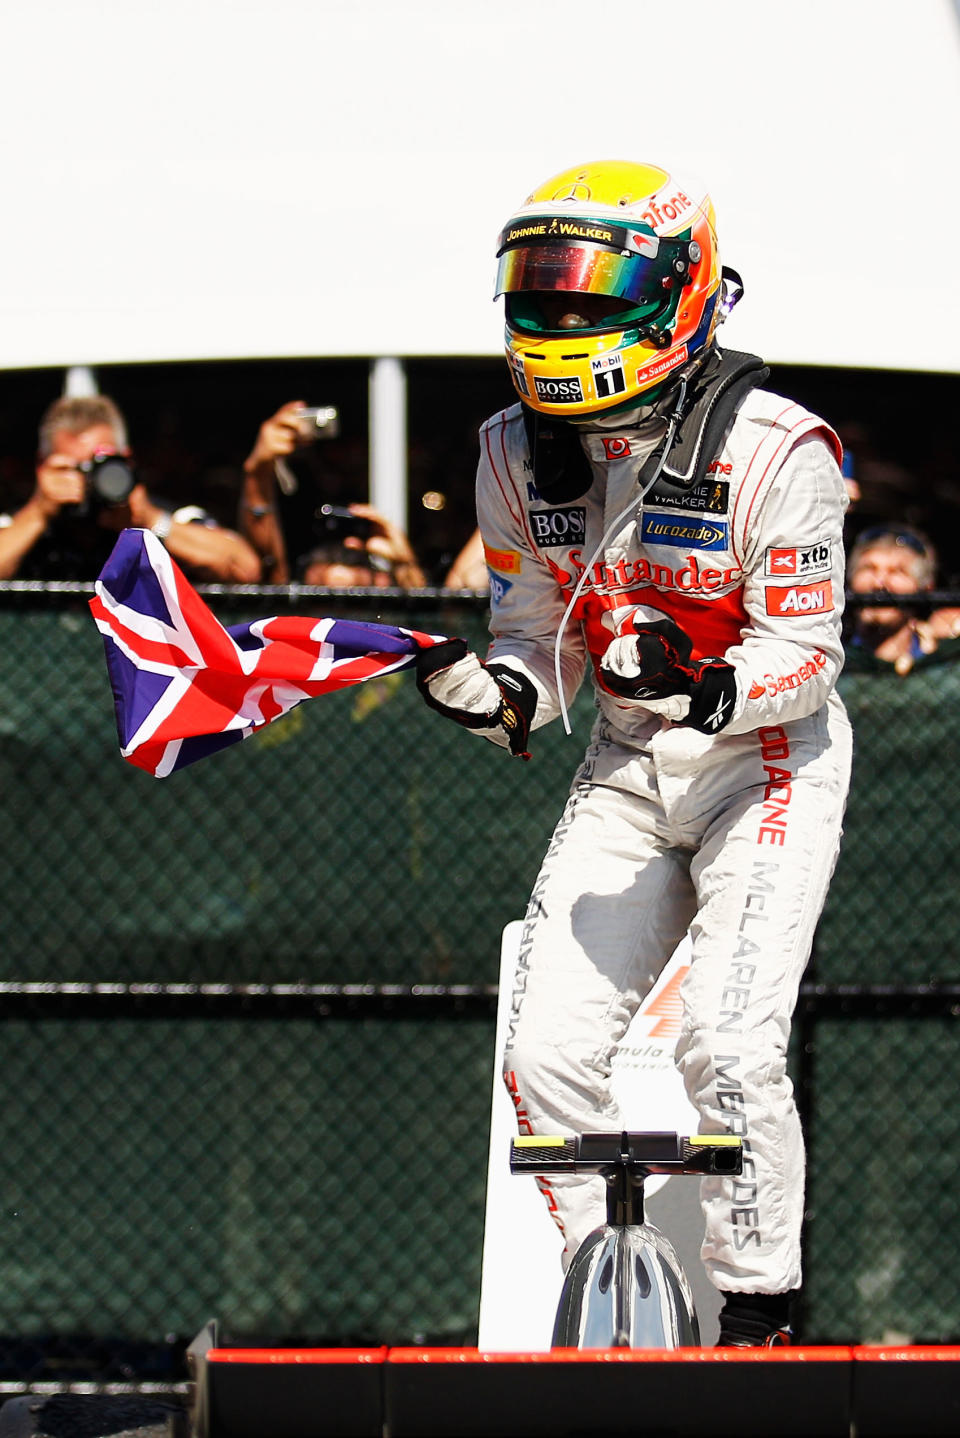 MONTREAL, CANADA - JUNE 10: Lewis Hamilton of Great Britain and McLaren celebrates in parc ferme after winning the Canadian Formula One Grand Prix at the Circuit Gilles Villeneuve on June 10, 2012 in Montreal, Canada. (Photo by Paul Gilham/Getty Images)